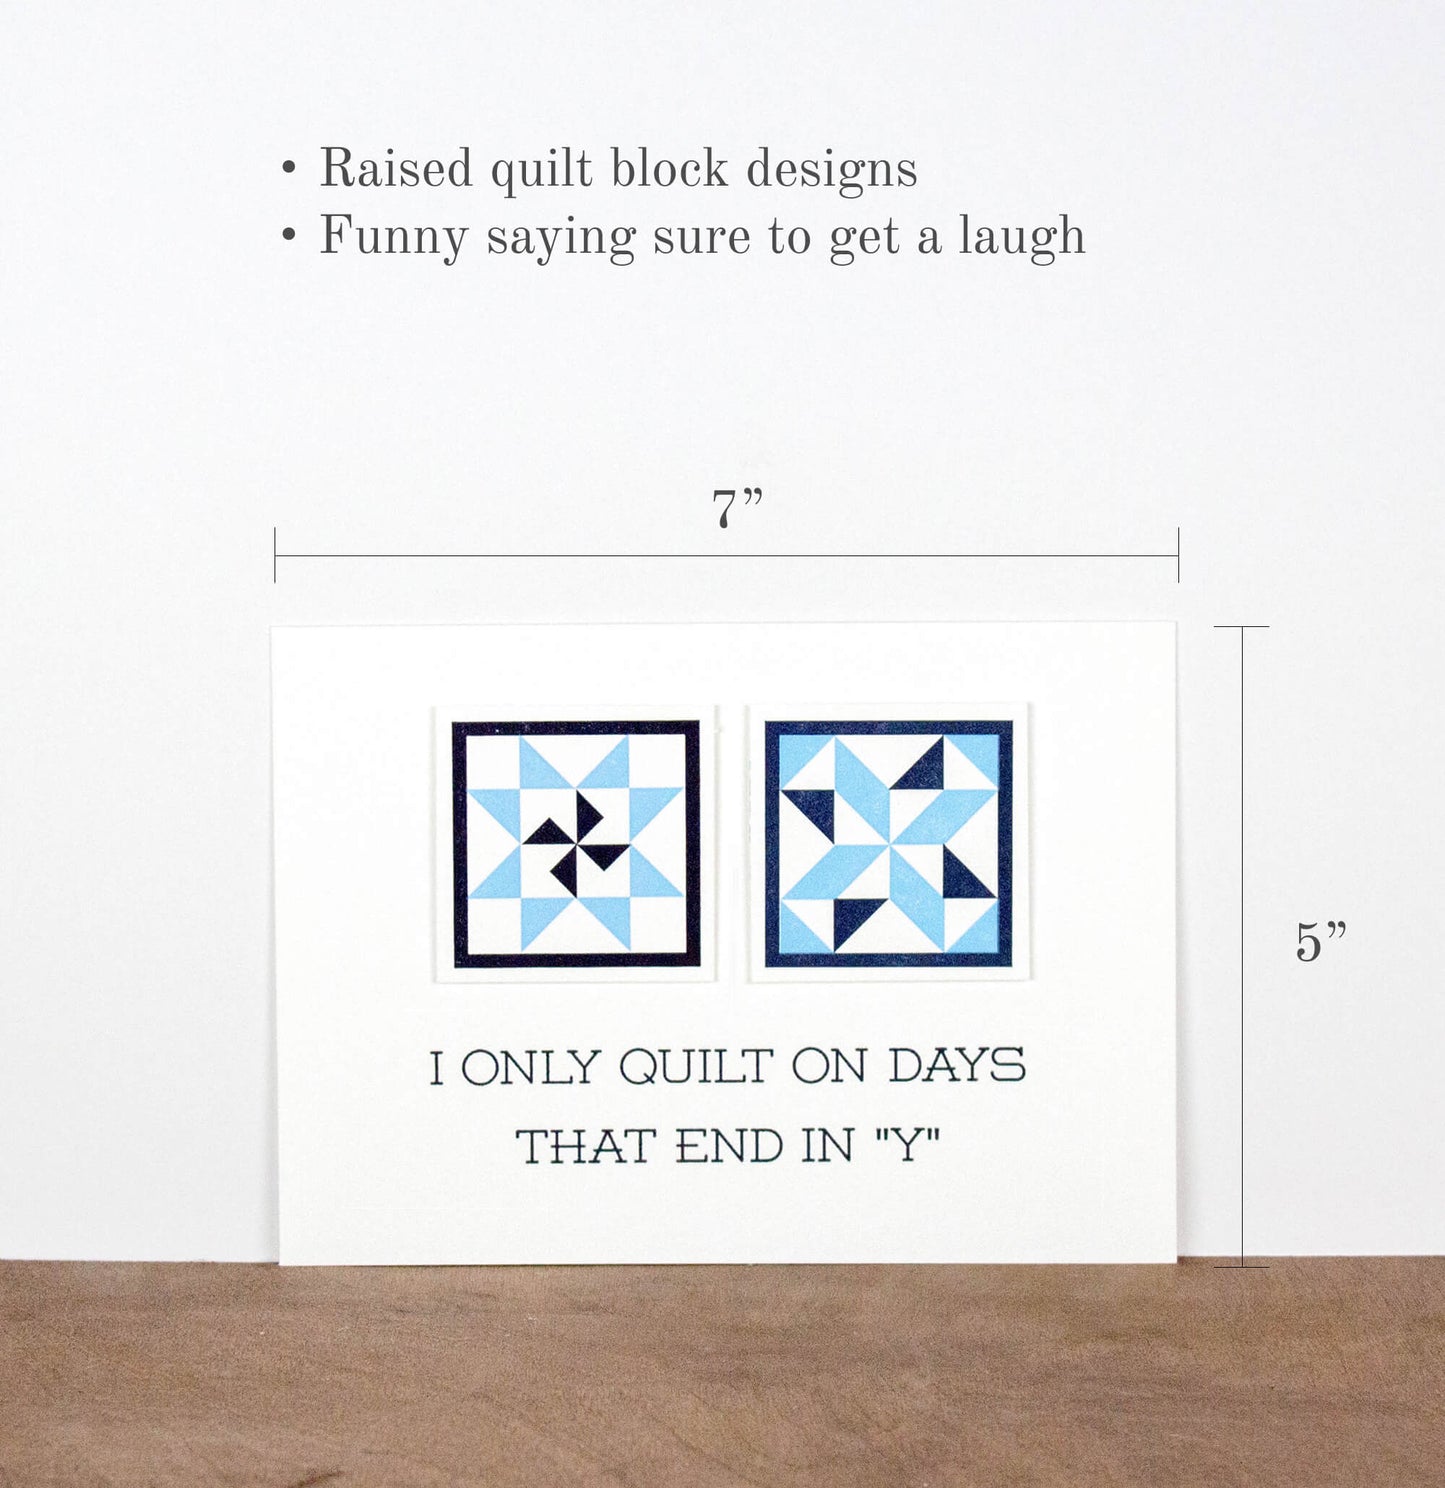 I Only Quilt In Days That End In "Y" 5 x 7 Letterpress Print